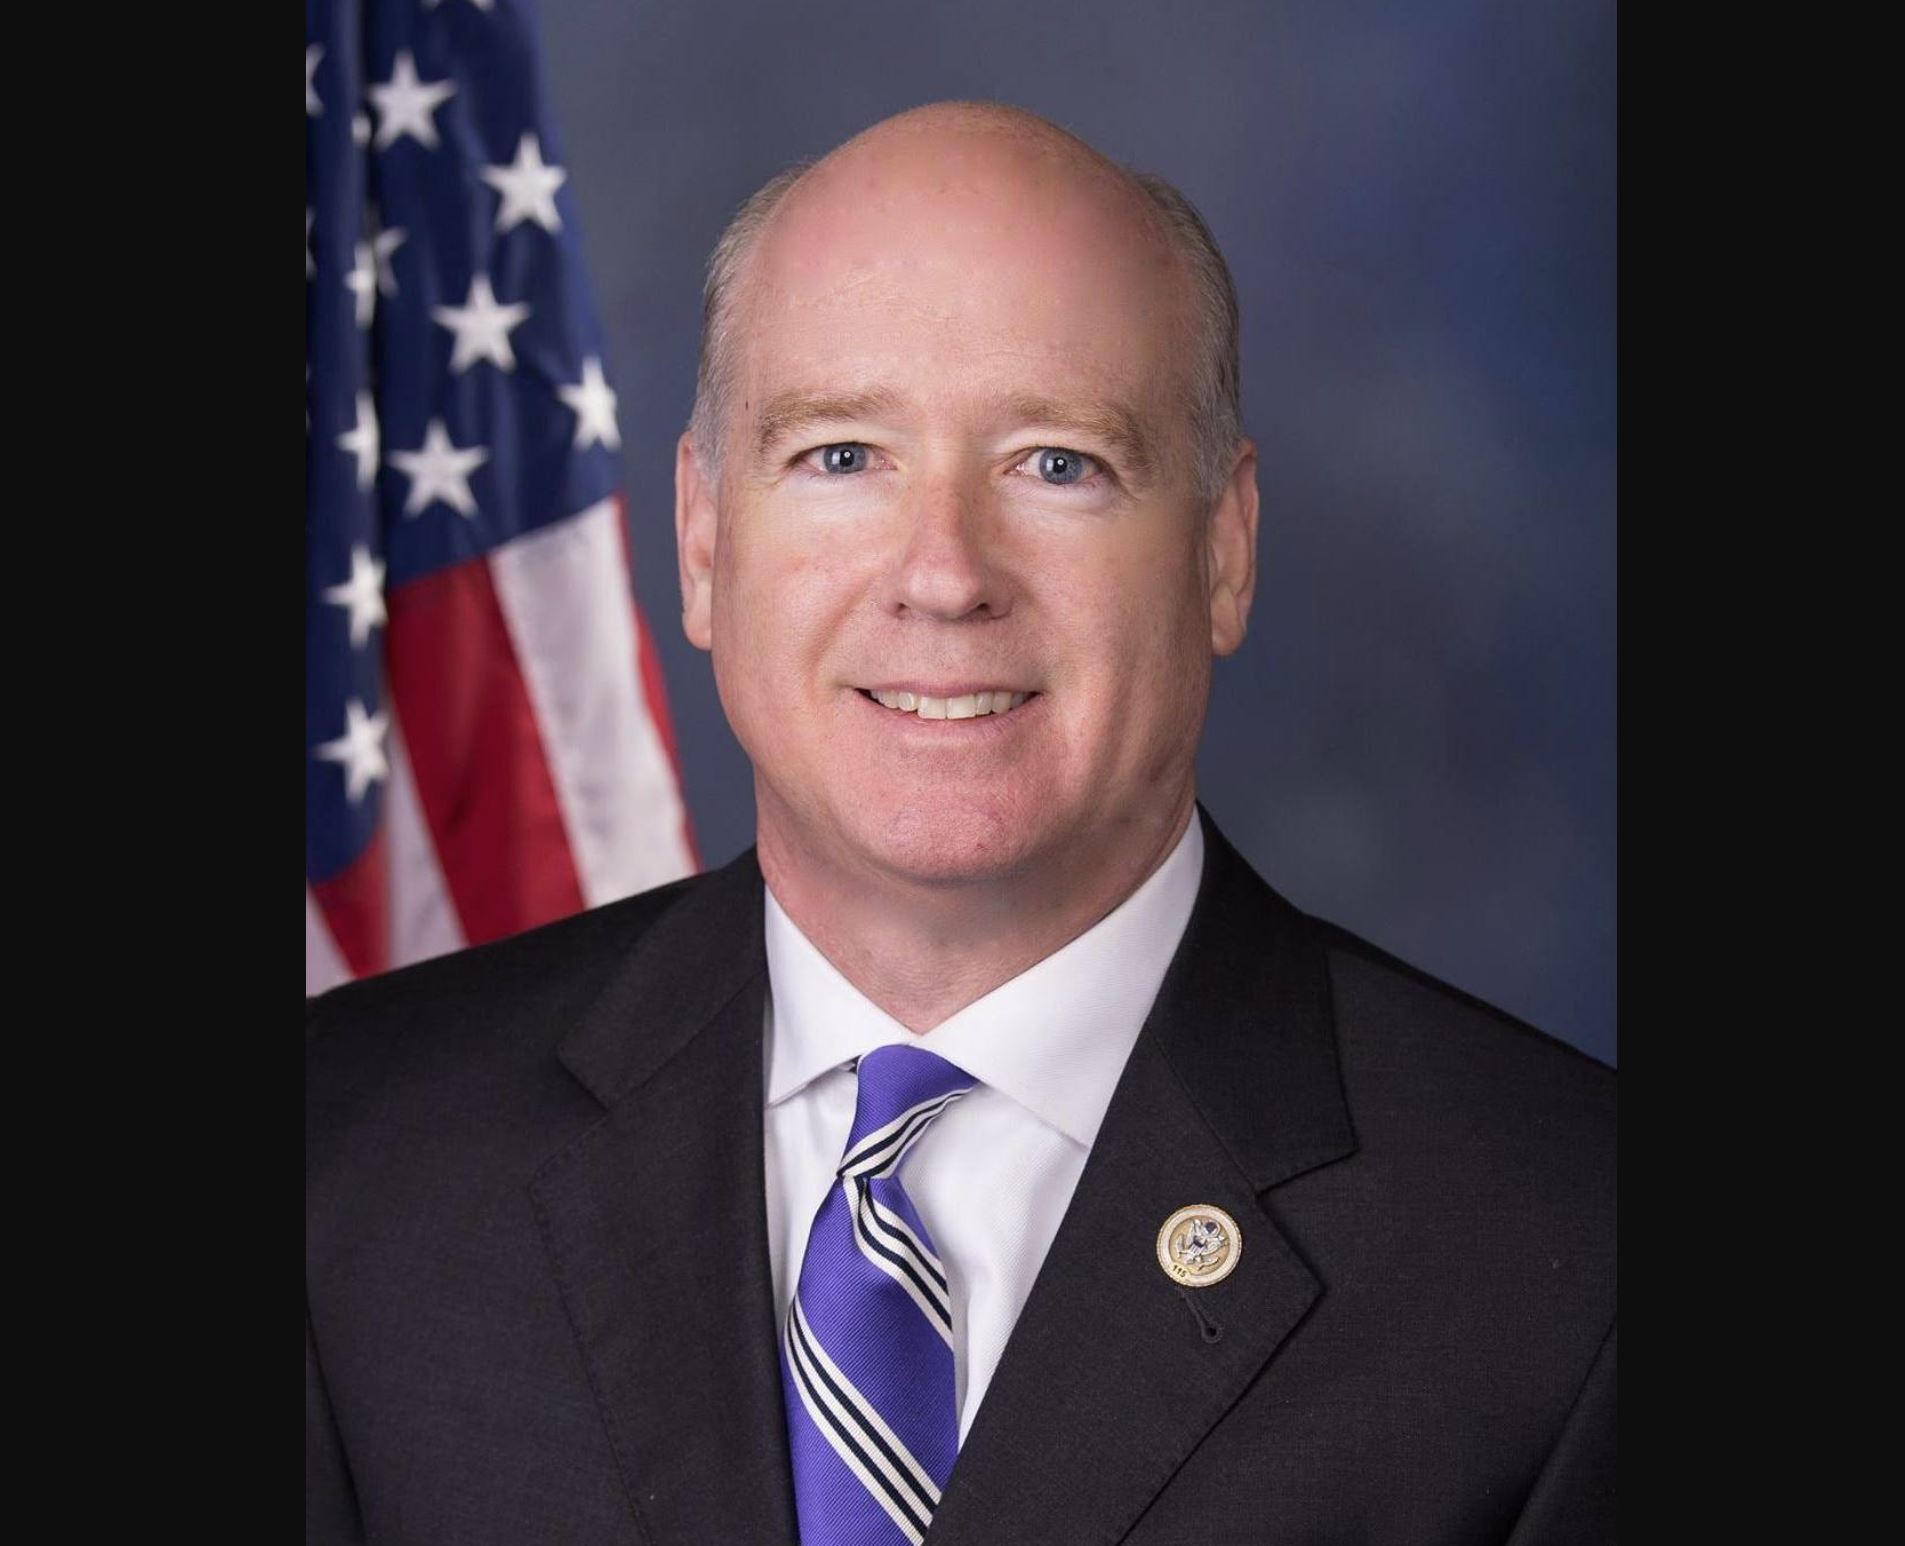 Republican Robert Aderholt wins reelection to U.S. House in Alabama's 4th Congressional District